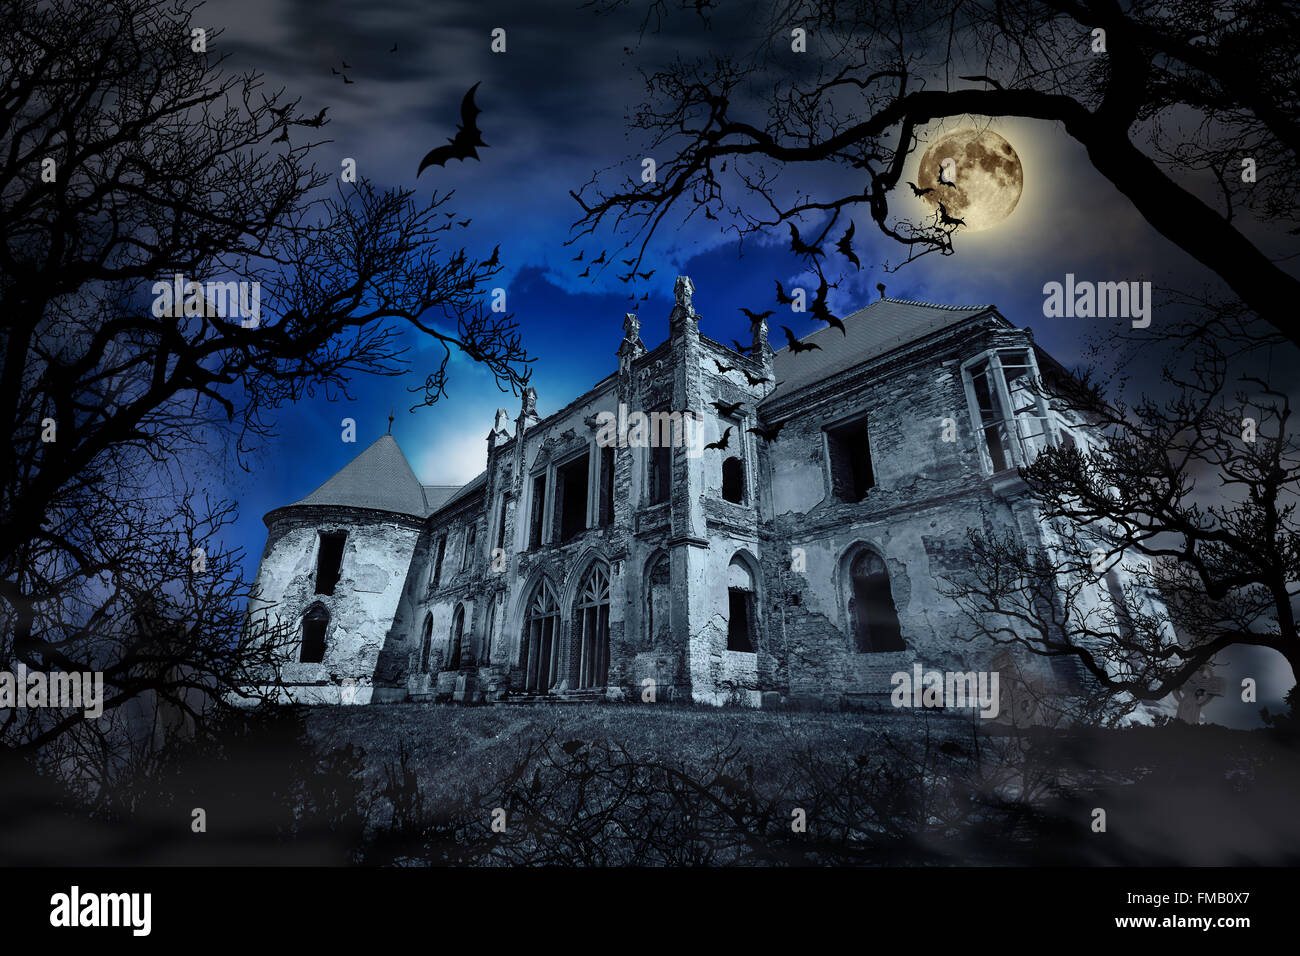 Haunted house in creepy foggy background with tree silhouettes. Stock Photo